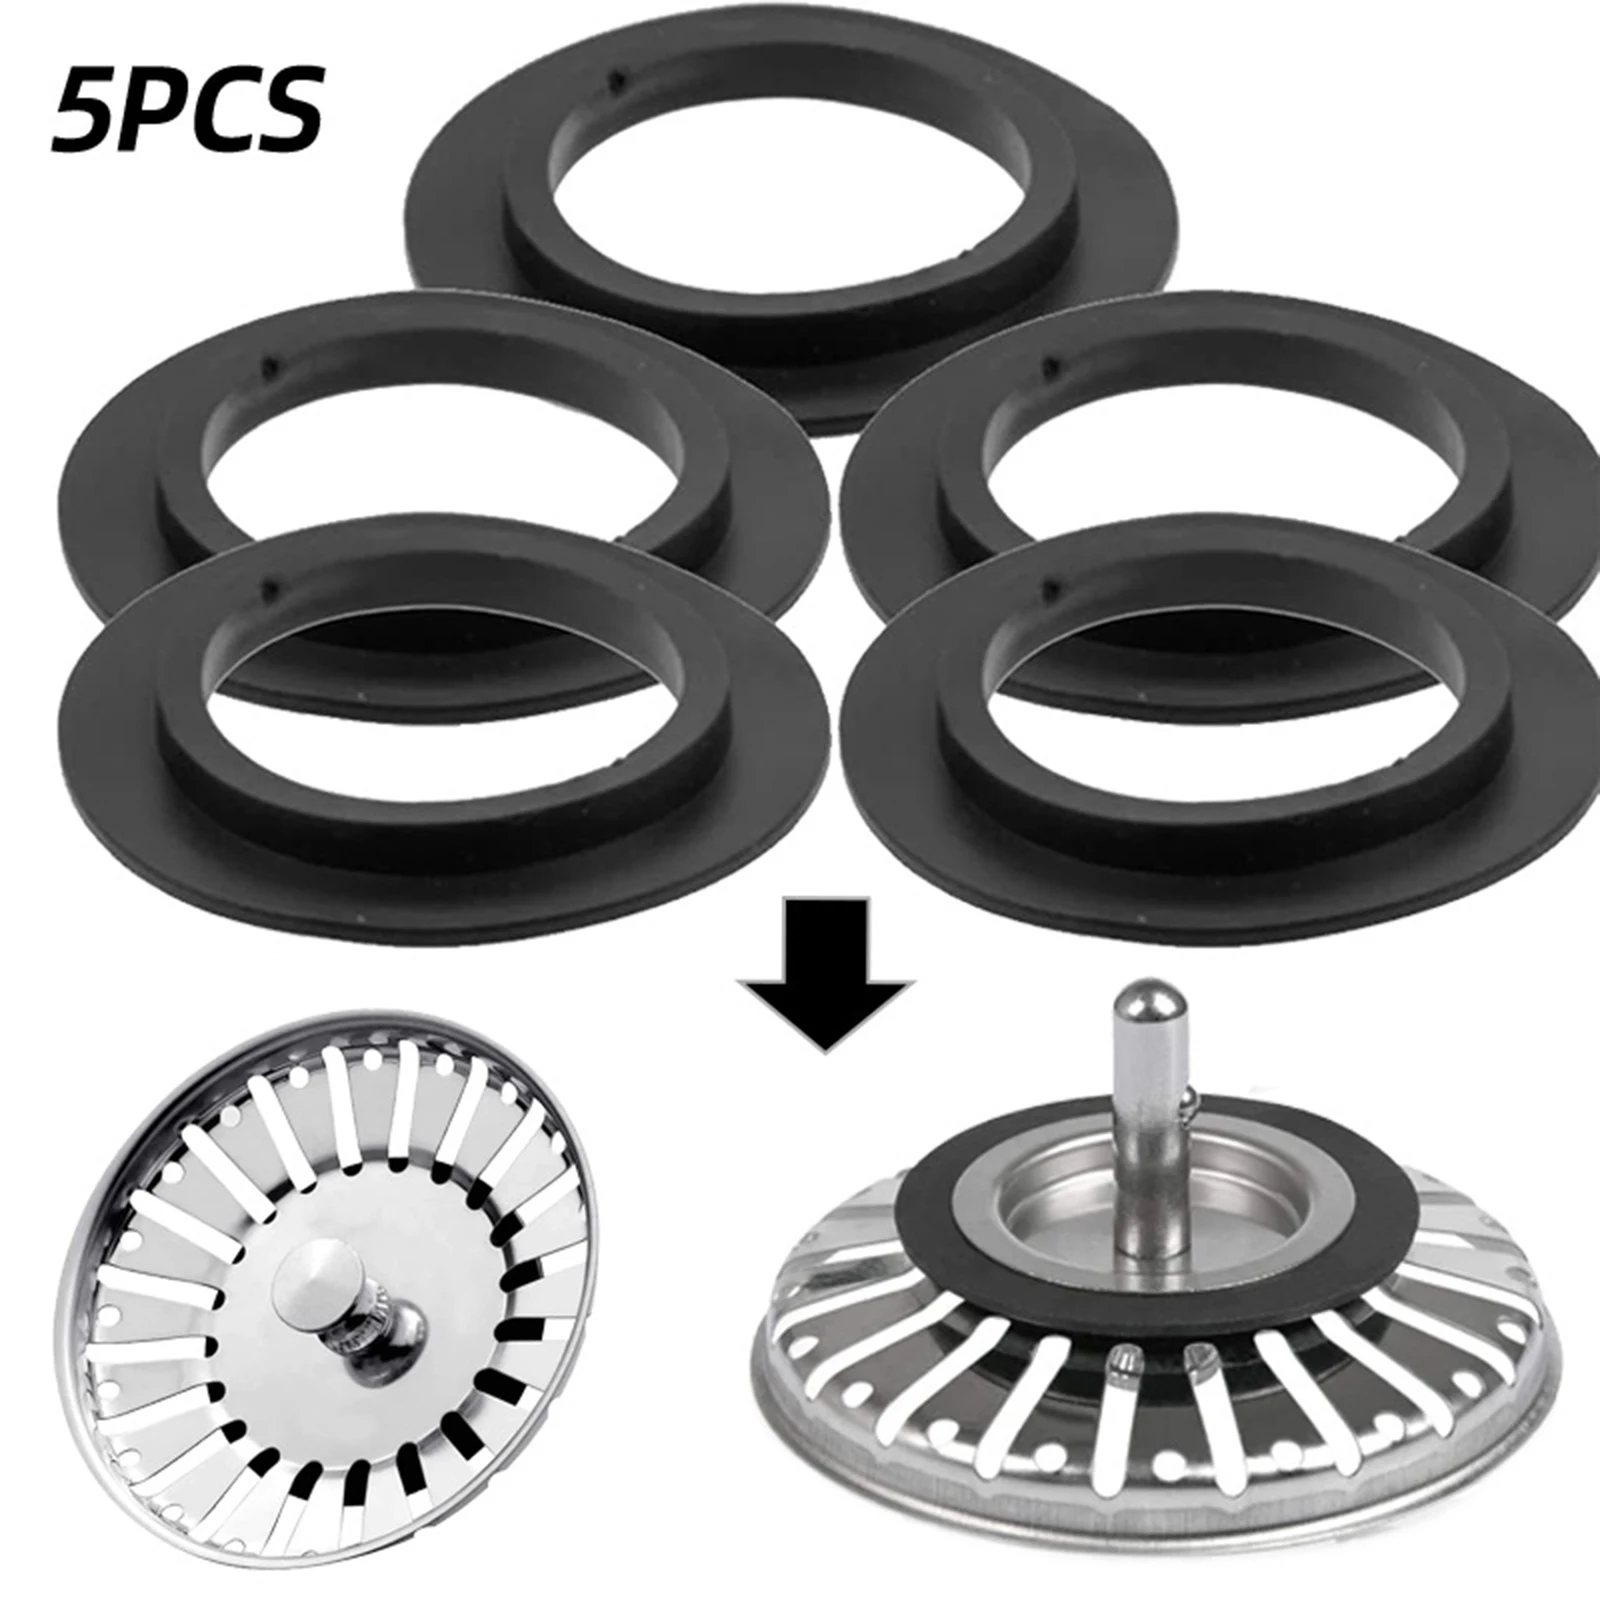 5Pcs Rubber Waterproof Gasket Strainer Seals Durable O-ring Washer Gaskets Kitchen Sink Filter Replacement Accessories 50 100pcs set hunting rubber o ring gasket grip washer grommets stems flights darts arrow tips broadhead replace accessories